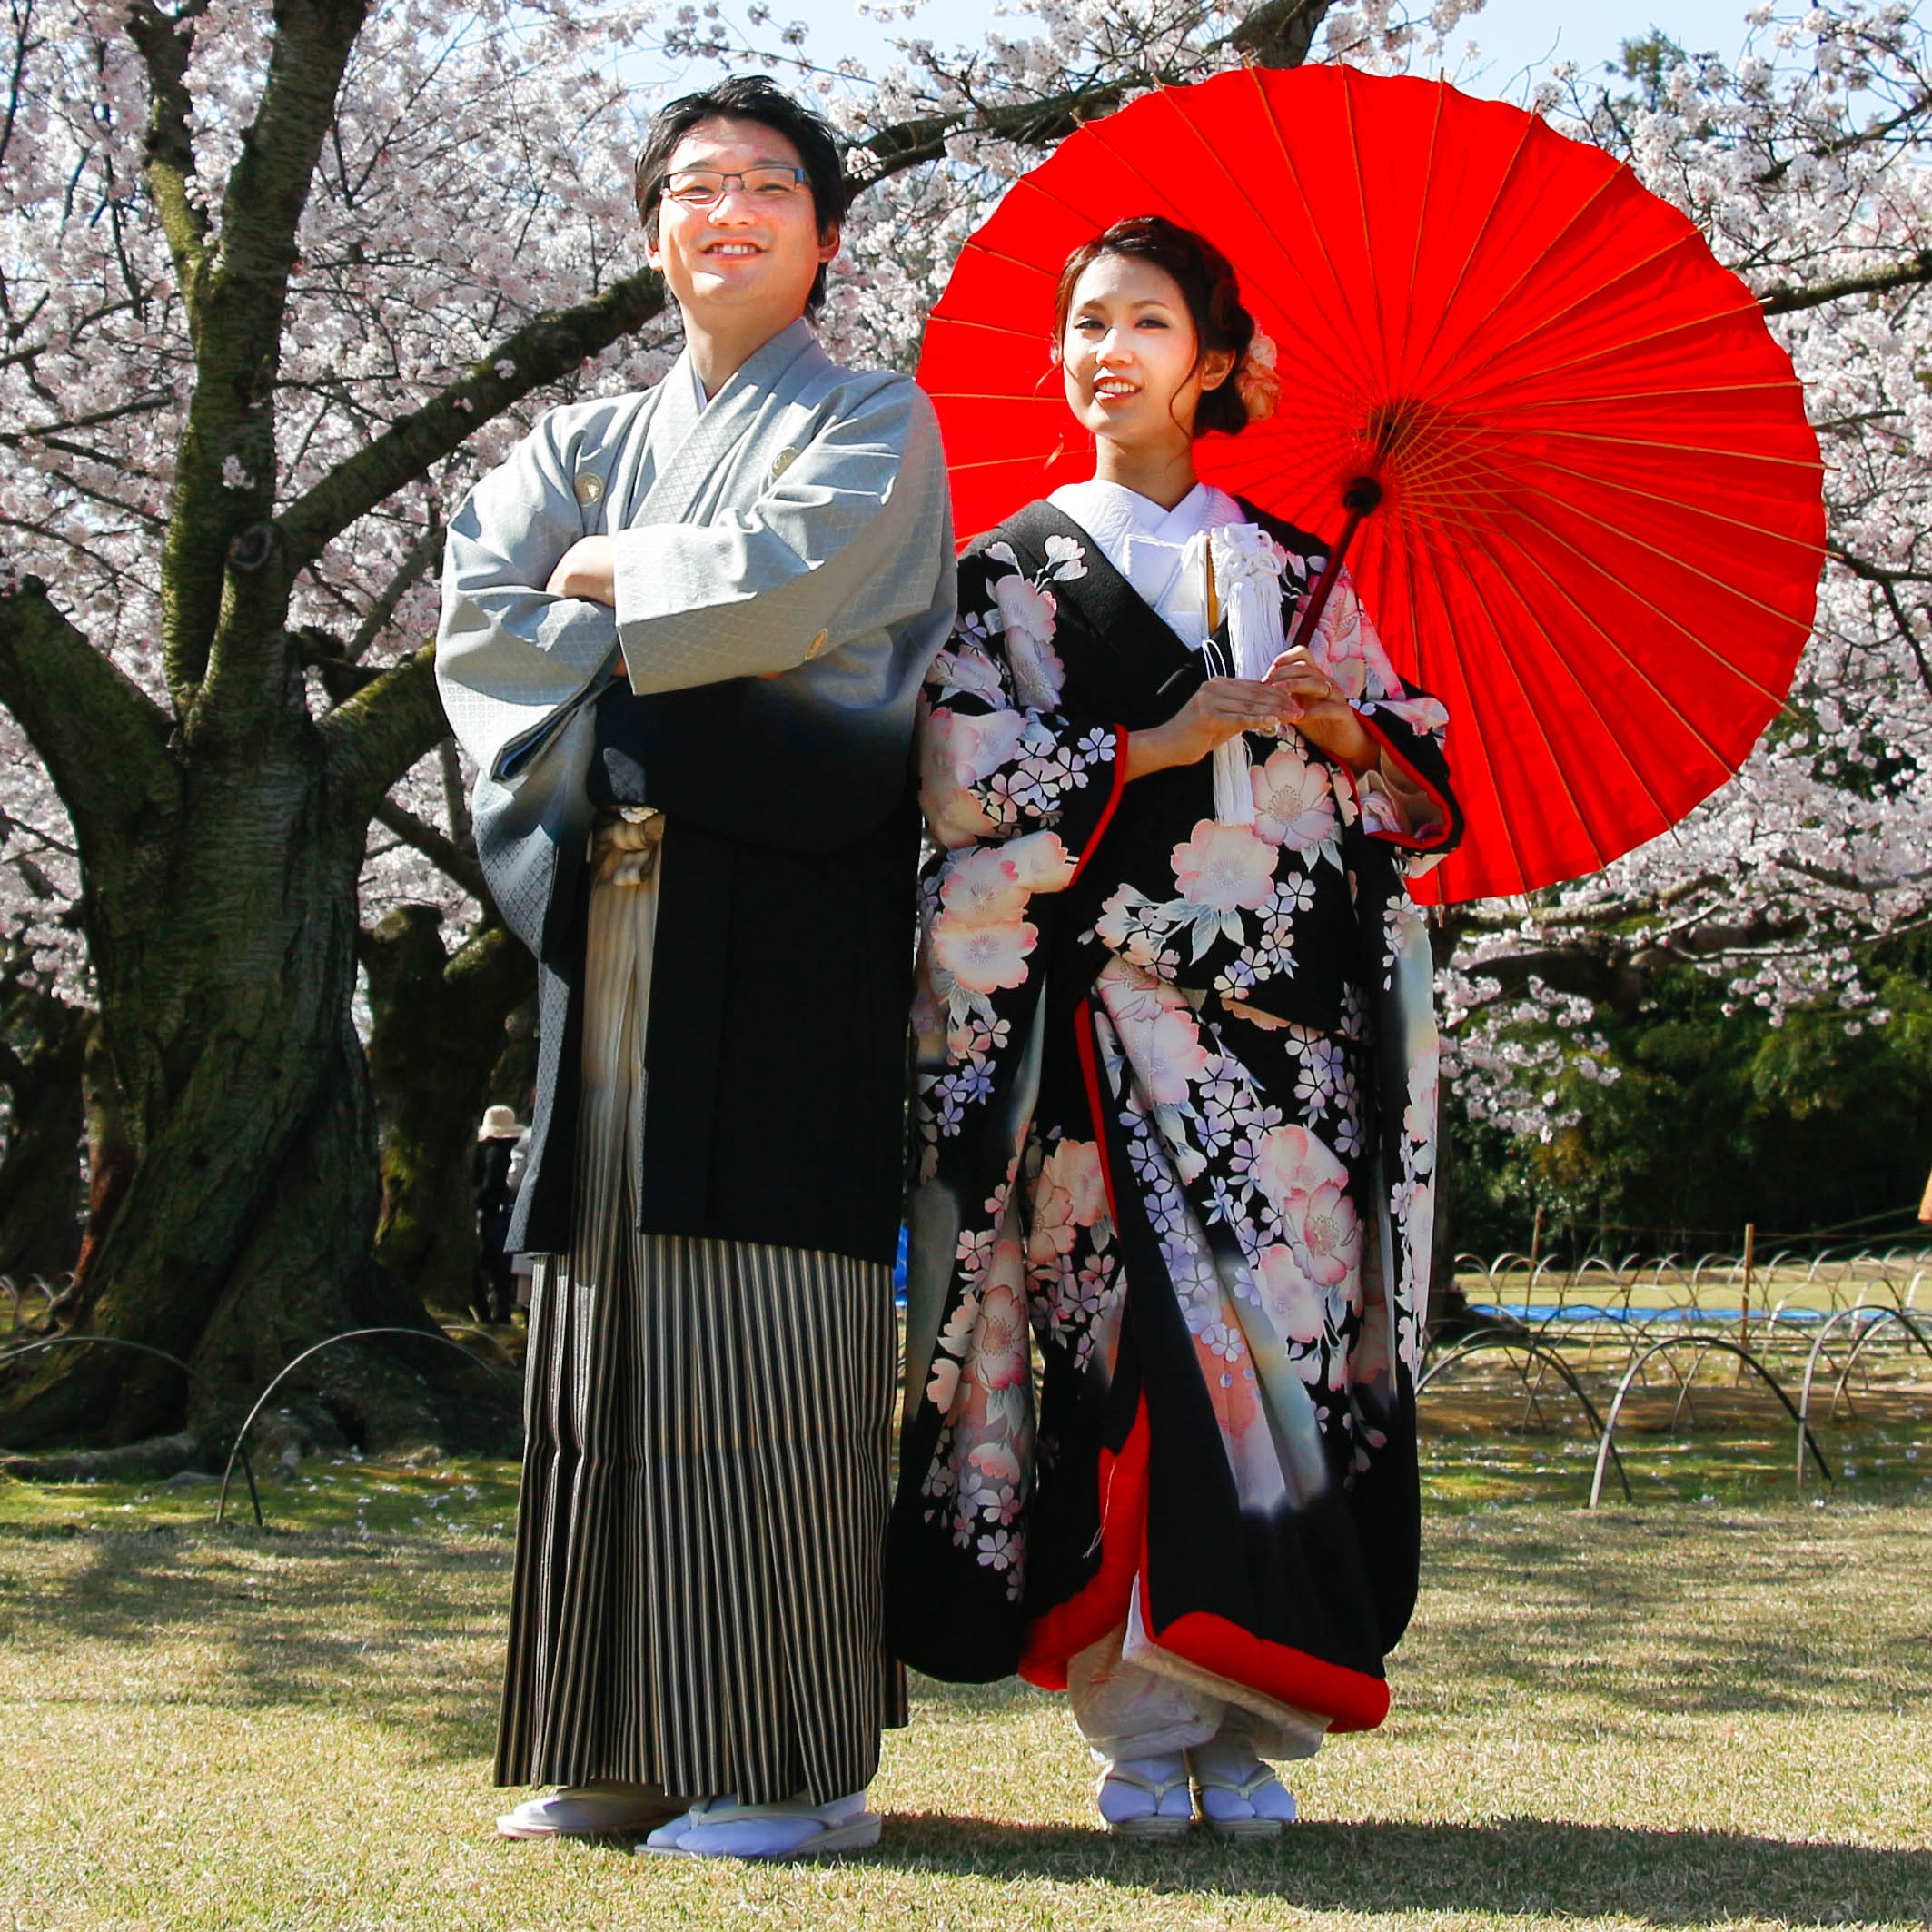 Japanese Couple In Traditional Dress Image Free Stock